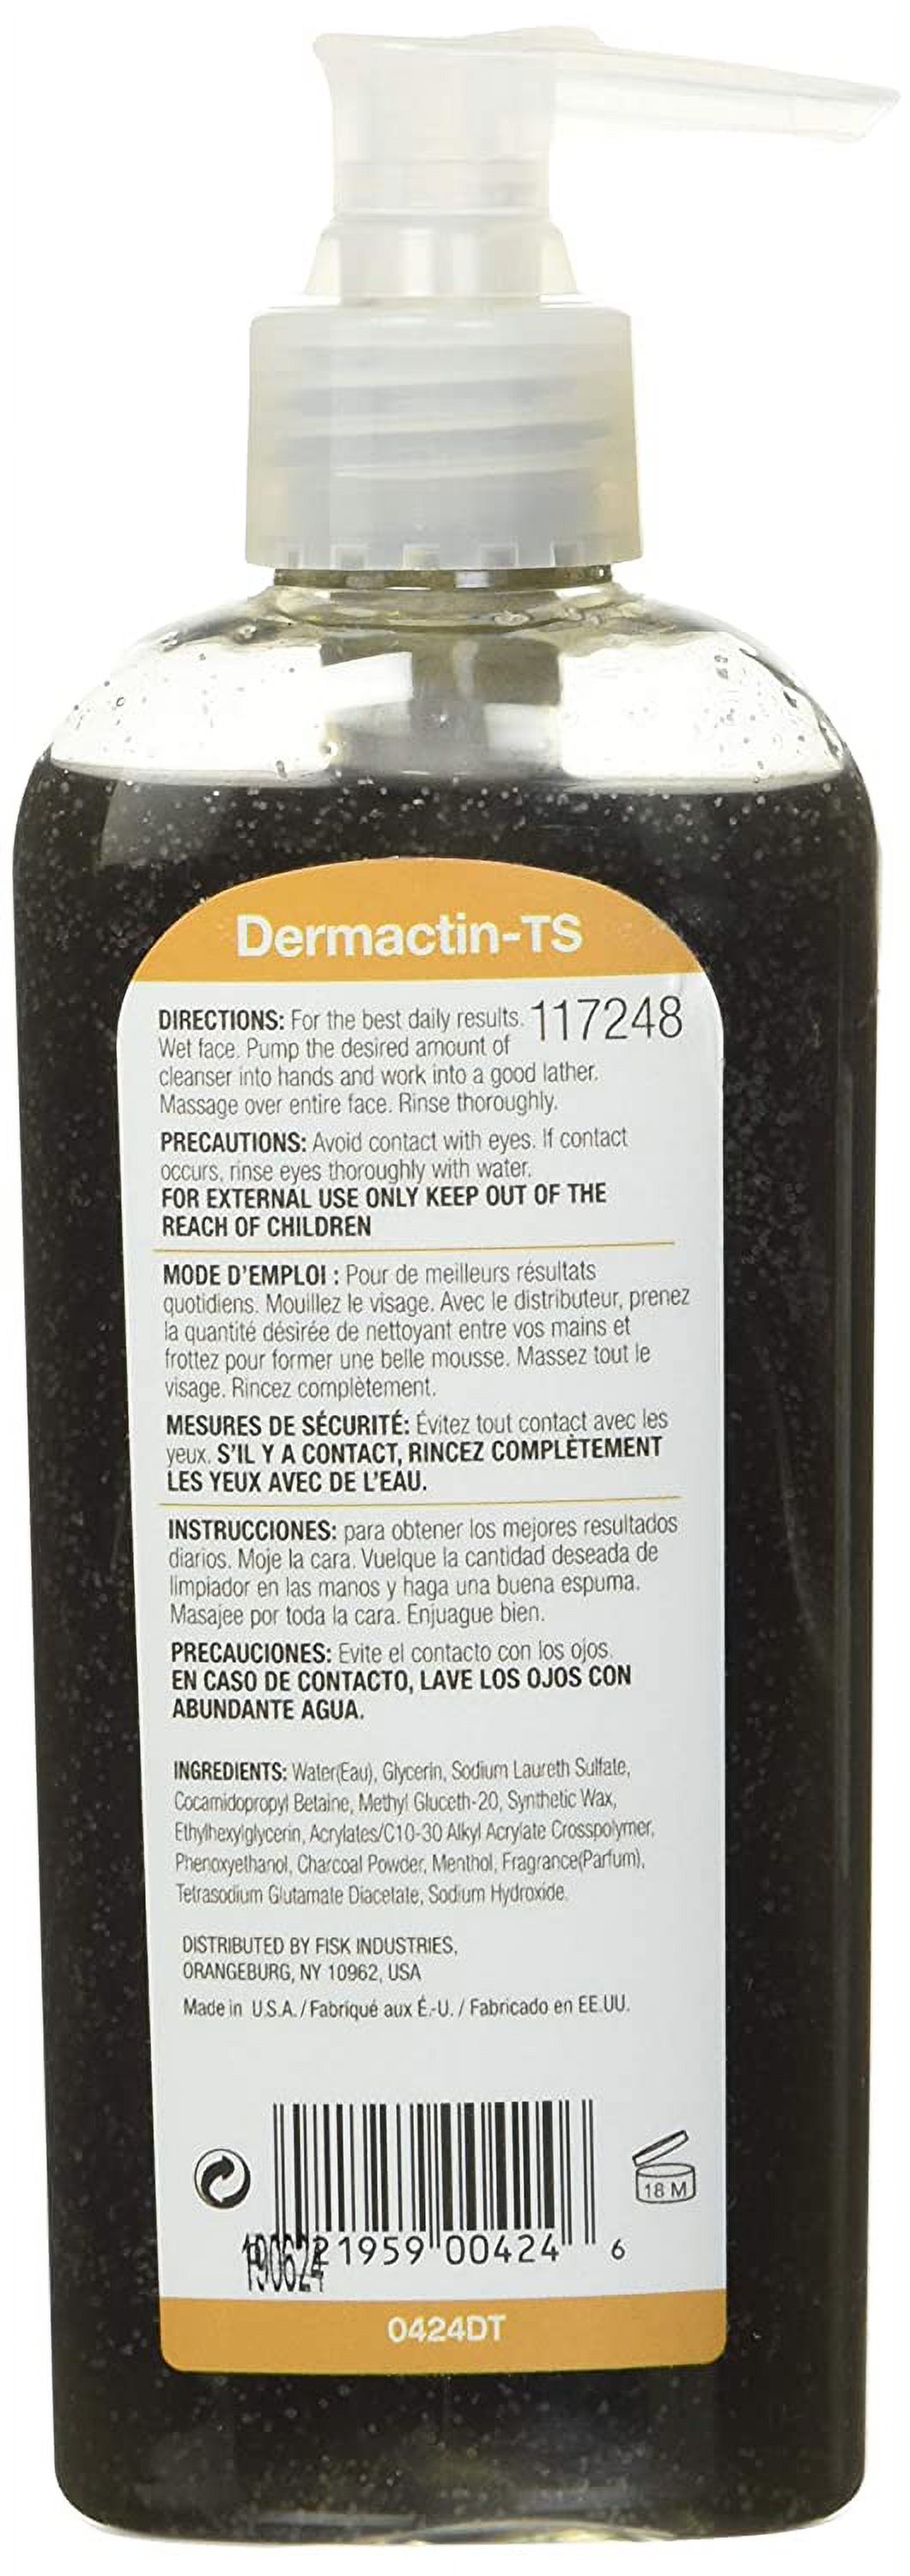 Dermactin-TS Pore Refining Charcoal Cleanser Gel 6 oz. - image 2 of 5